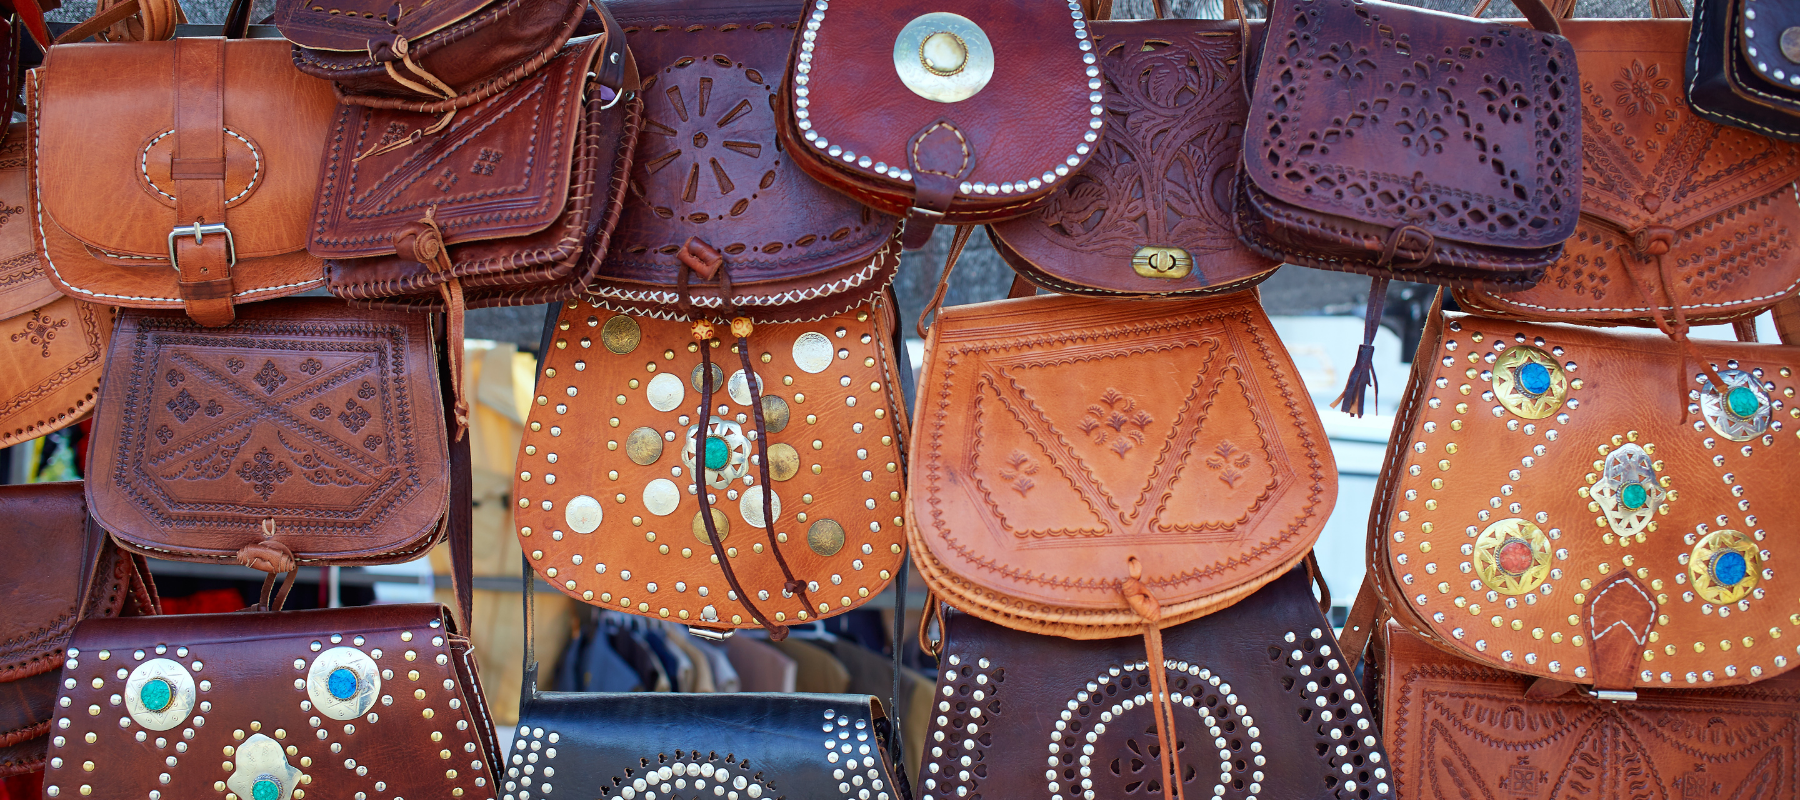 Moroccan leather handbag in a Souk